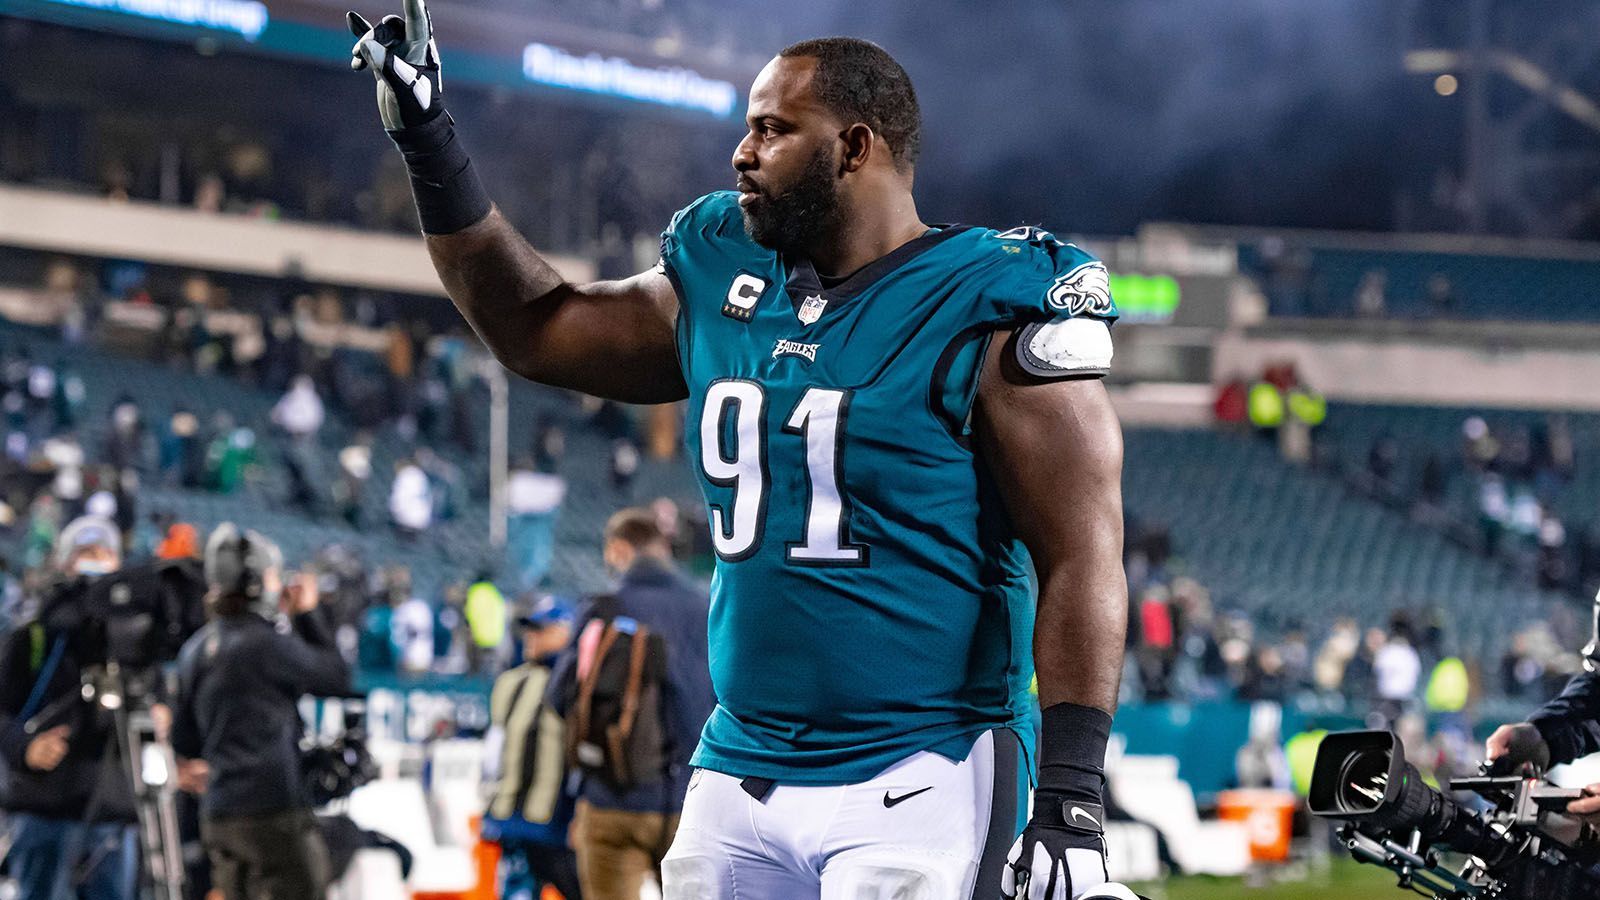 
                <strong>8. Platz (geteilt): Fletcher Cox</strong><br>
                &#x2022; Team: Philadelphia Eagles<br>&#x2022; Position: Defensive Tackle<br>&#x2022; <strong>Overall Rating: 88</strong><br>&#x2022; Key Stats: Speed: 76 - Strength: 94 - Awareness: 87<br>
              